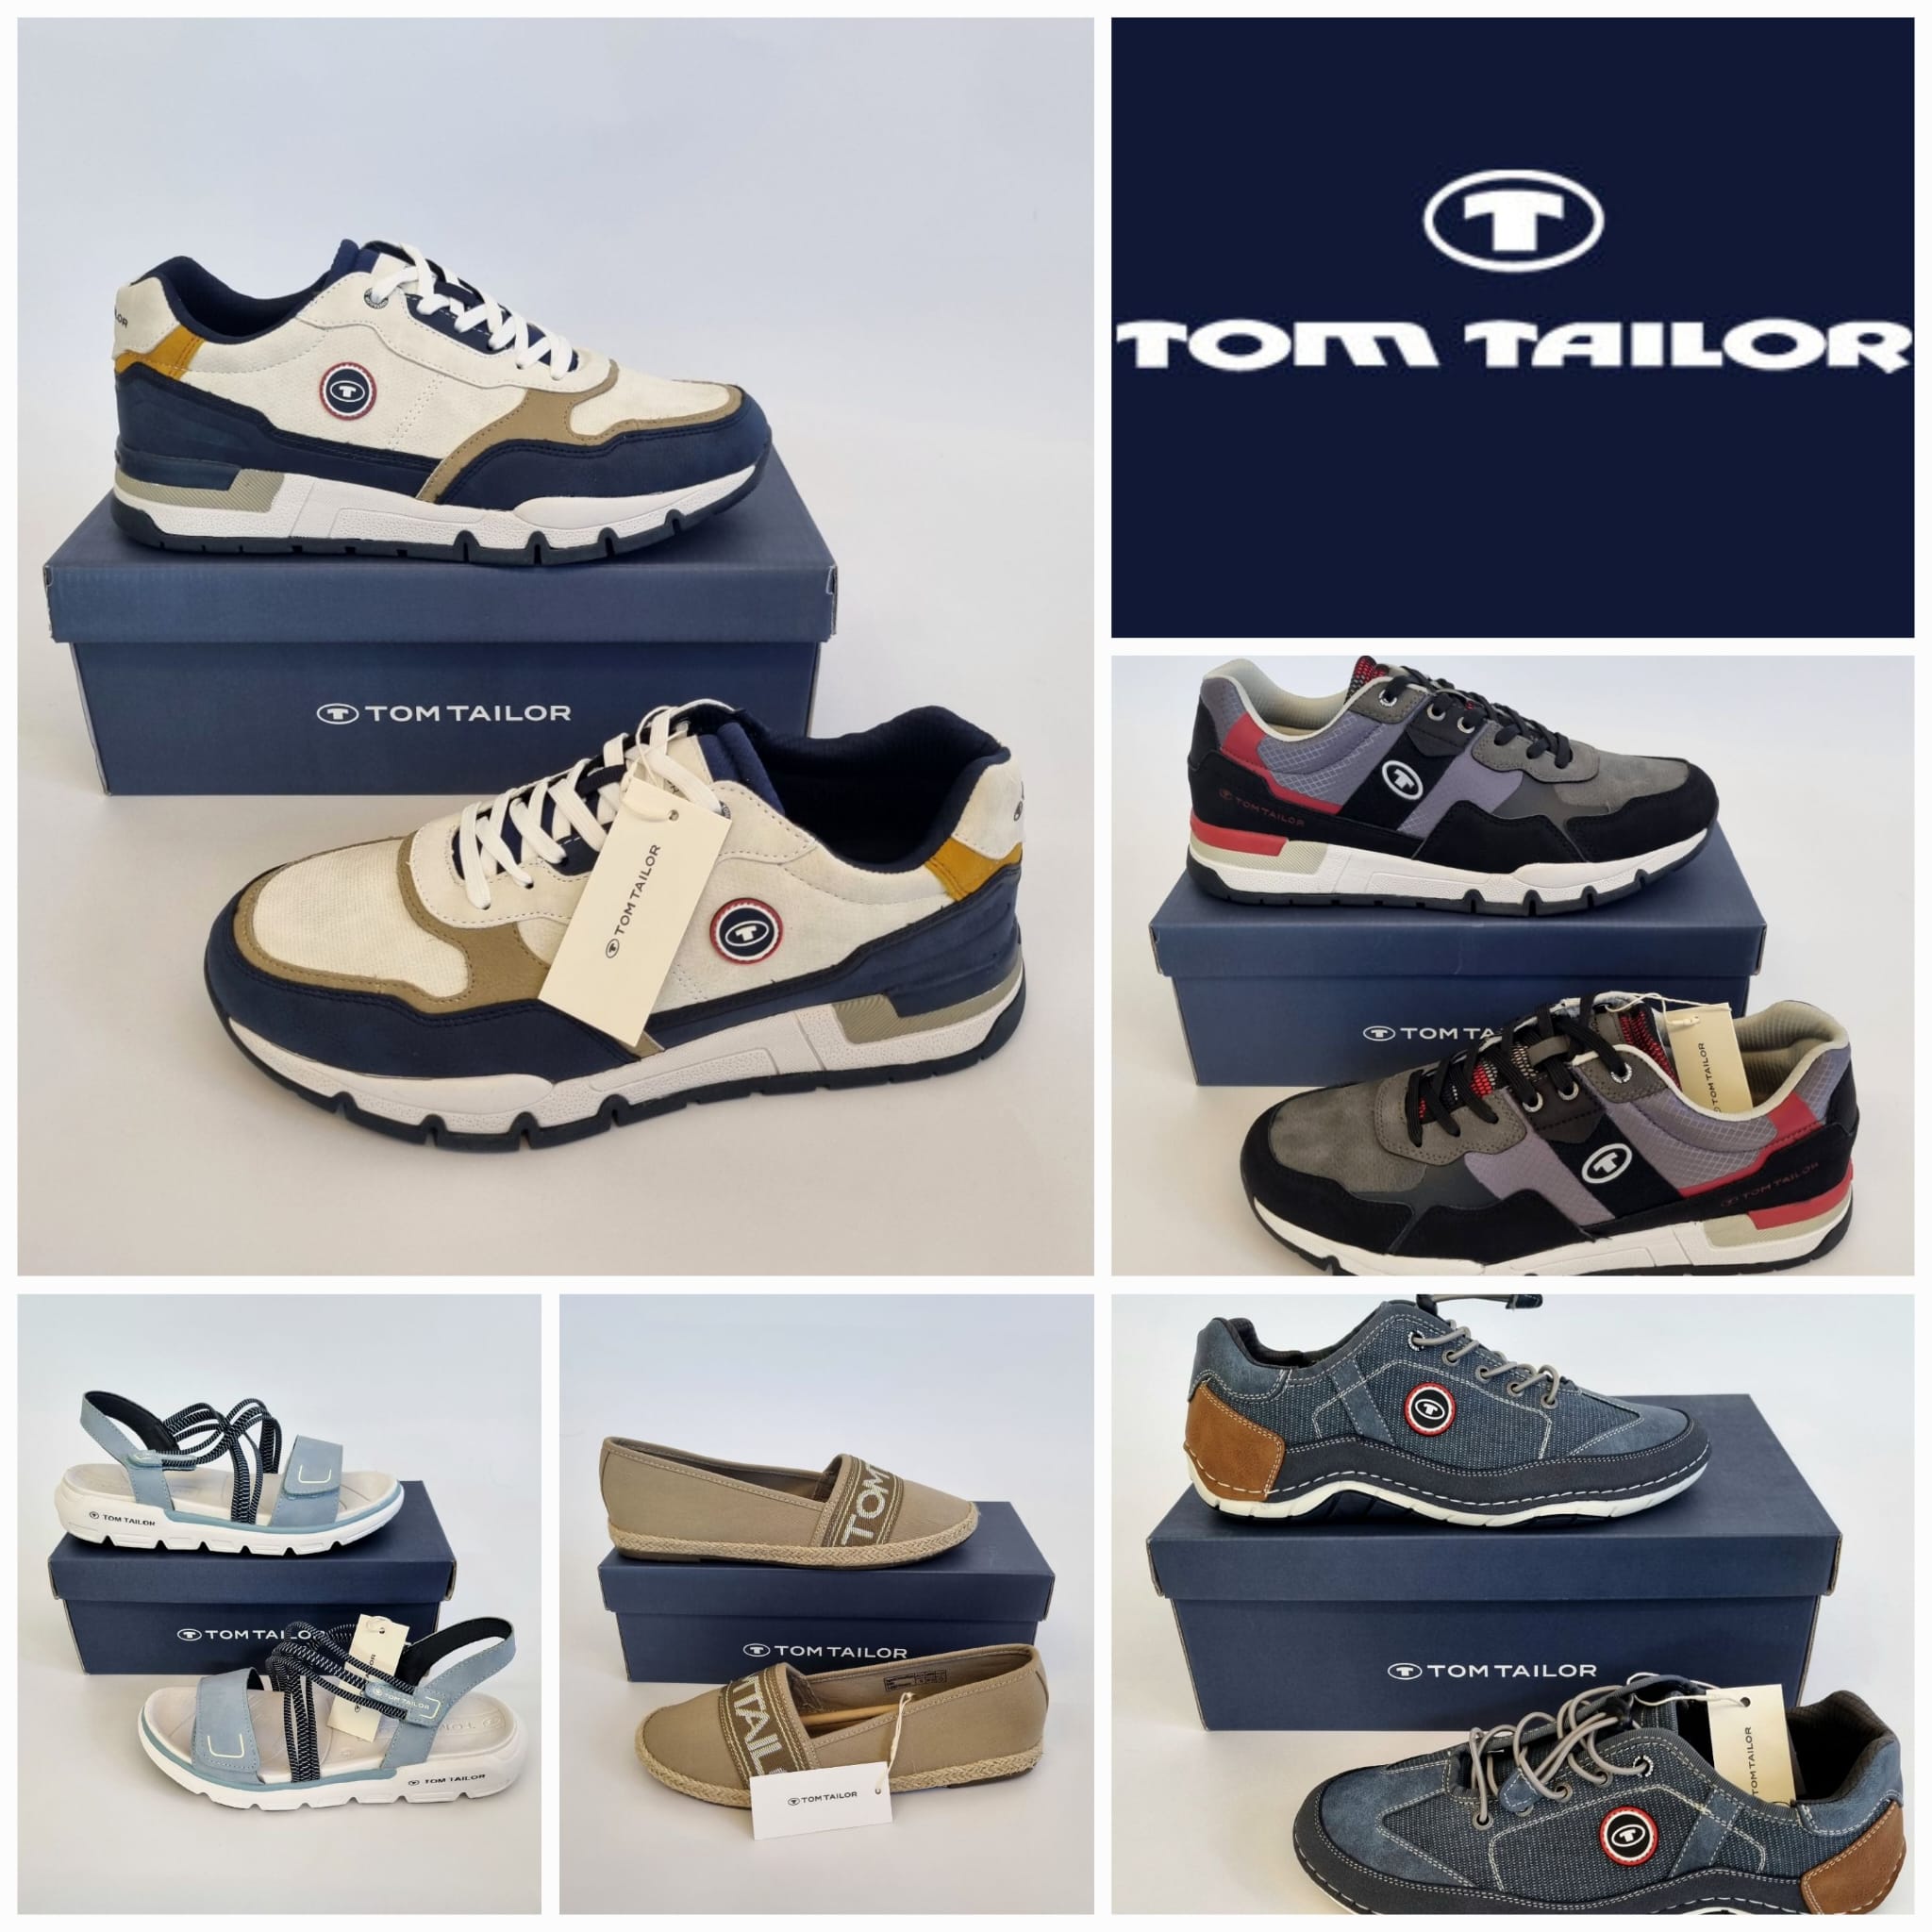 Tom Tailor shoes